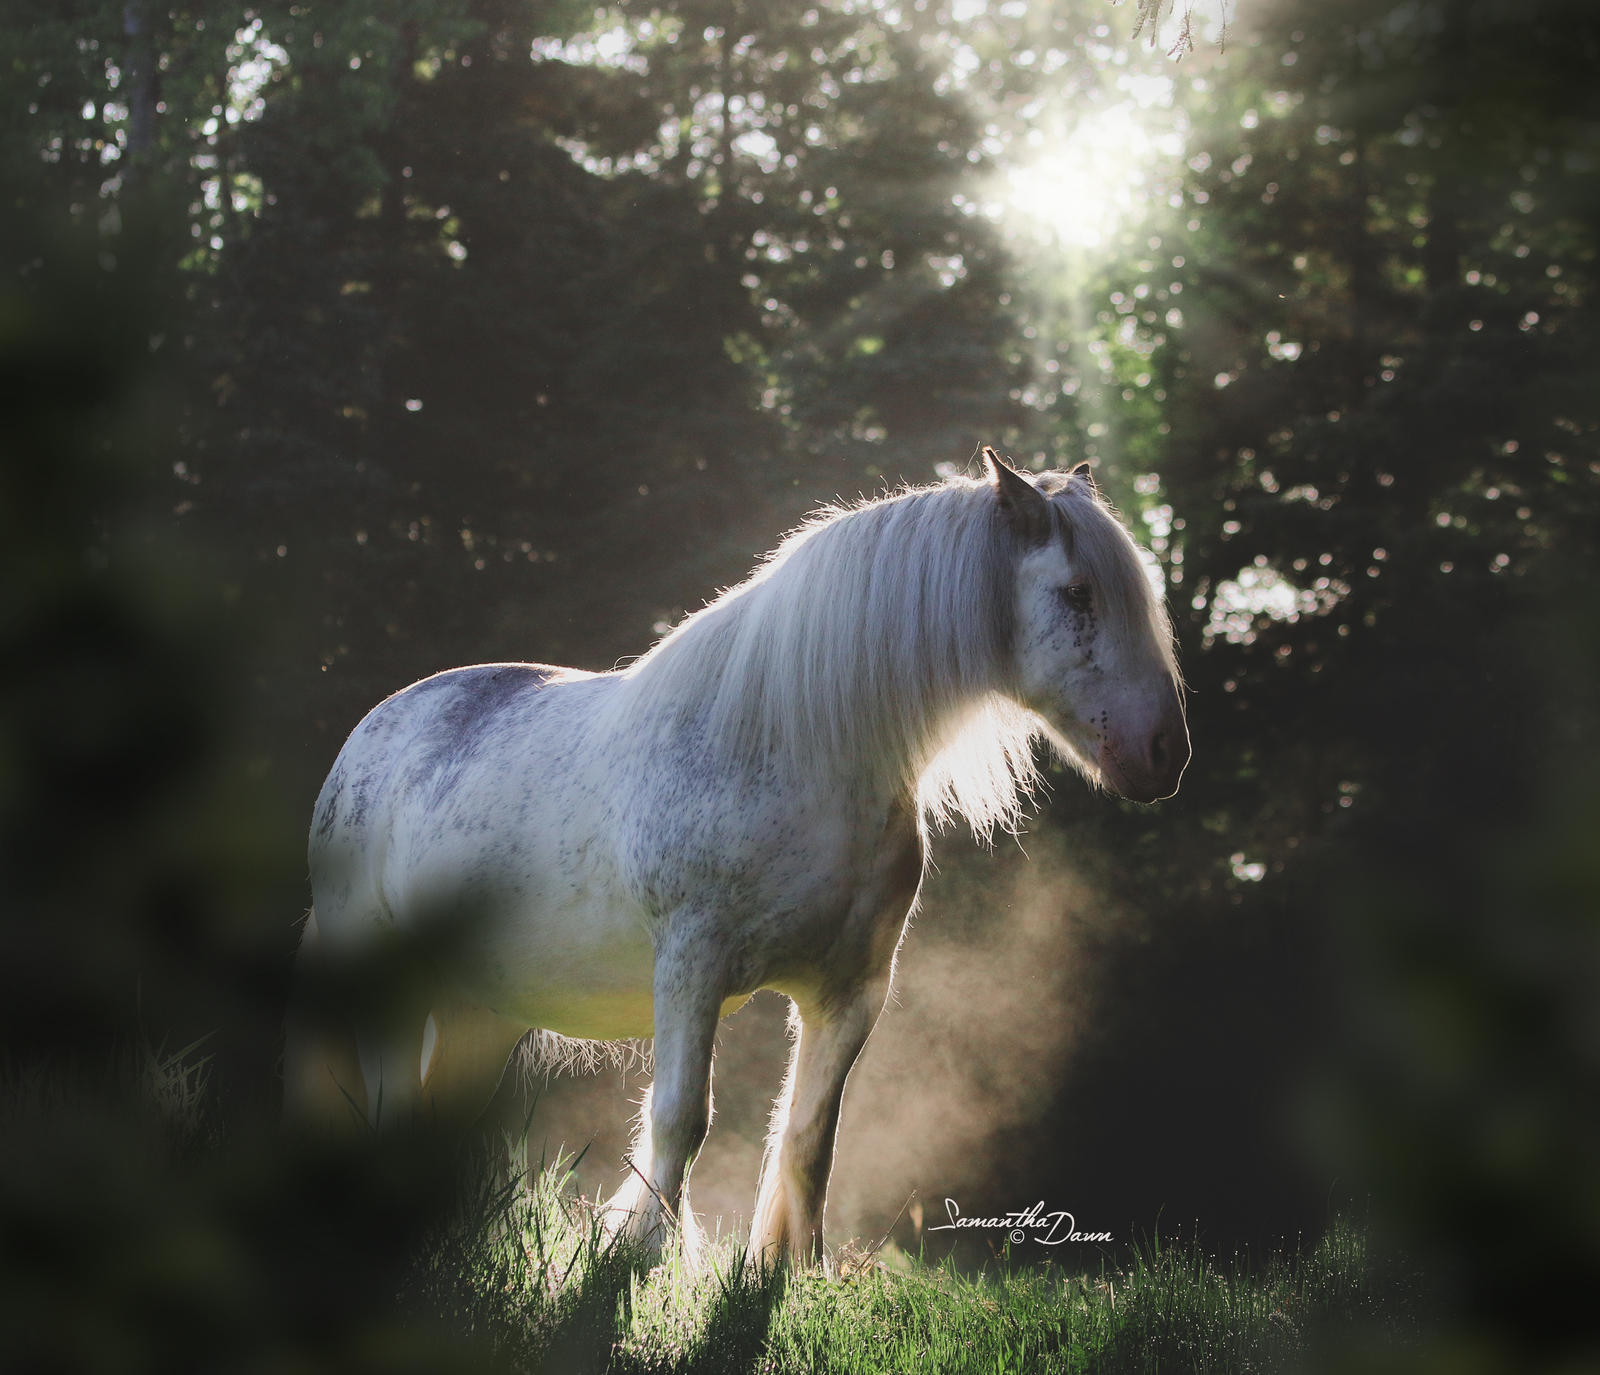 A Real Life Unicorn... by SamanthaDawn1 on DeviantArt